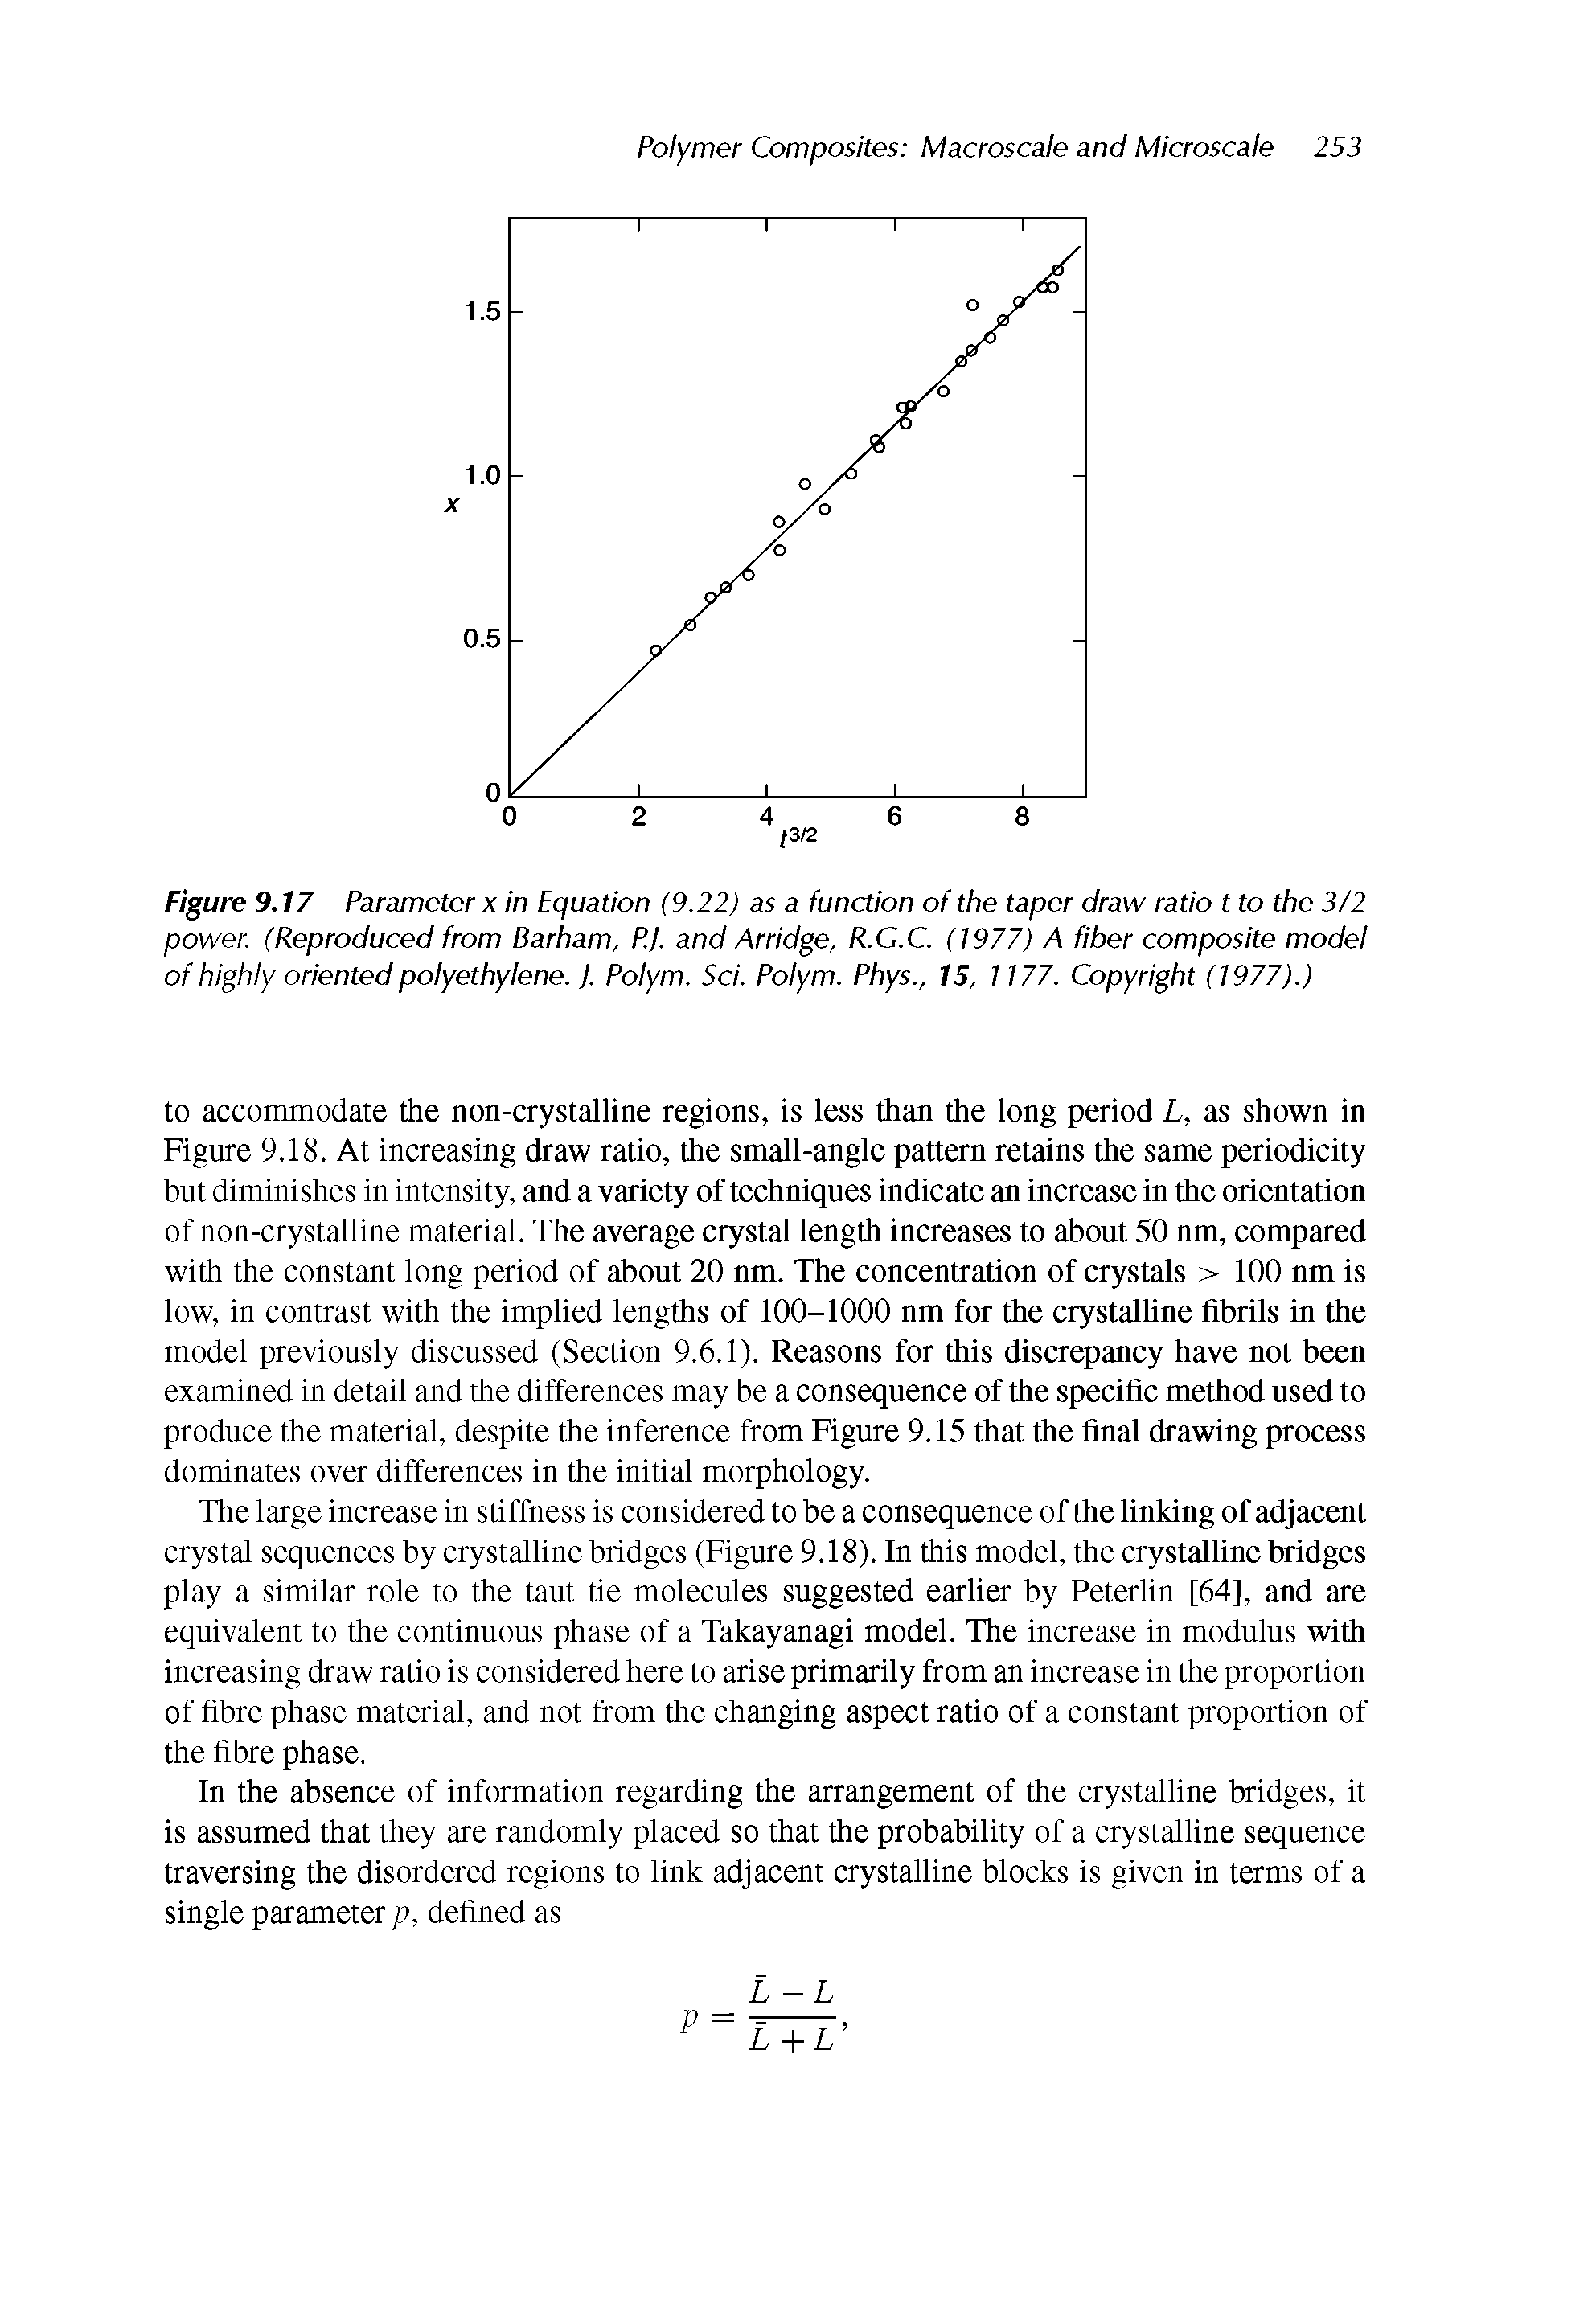 Figure 9.17 Parameter x in Equation (9.22) as a function of the taper draw ratio t to the 3/2 power. (Reproduced from Barham, P.j. and Arridge, R.C.C. (1977) A fiber composite model of highly oriented polyethylene. J. Polym. Sci. Polym. Phys., 15, 1177. Copyright (1977).)...